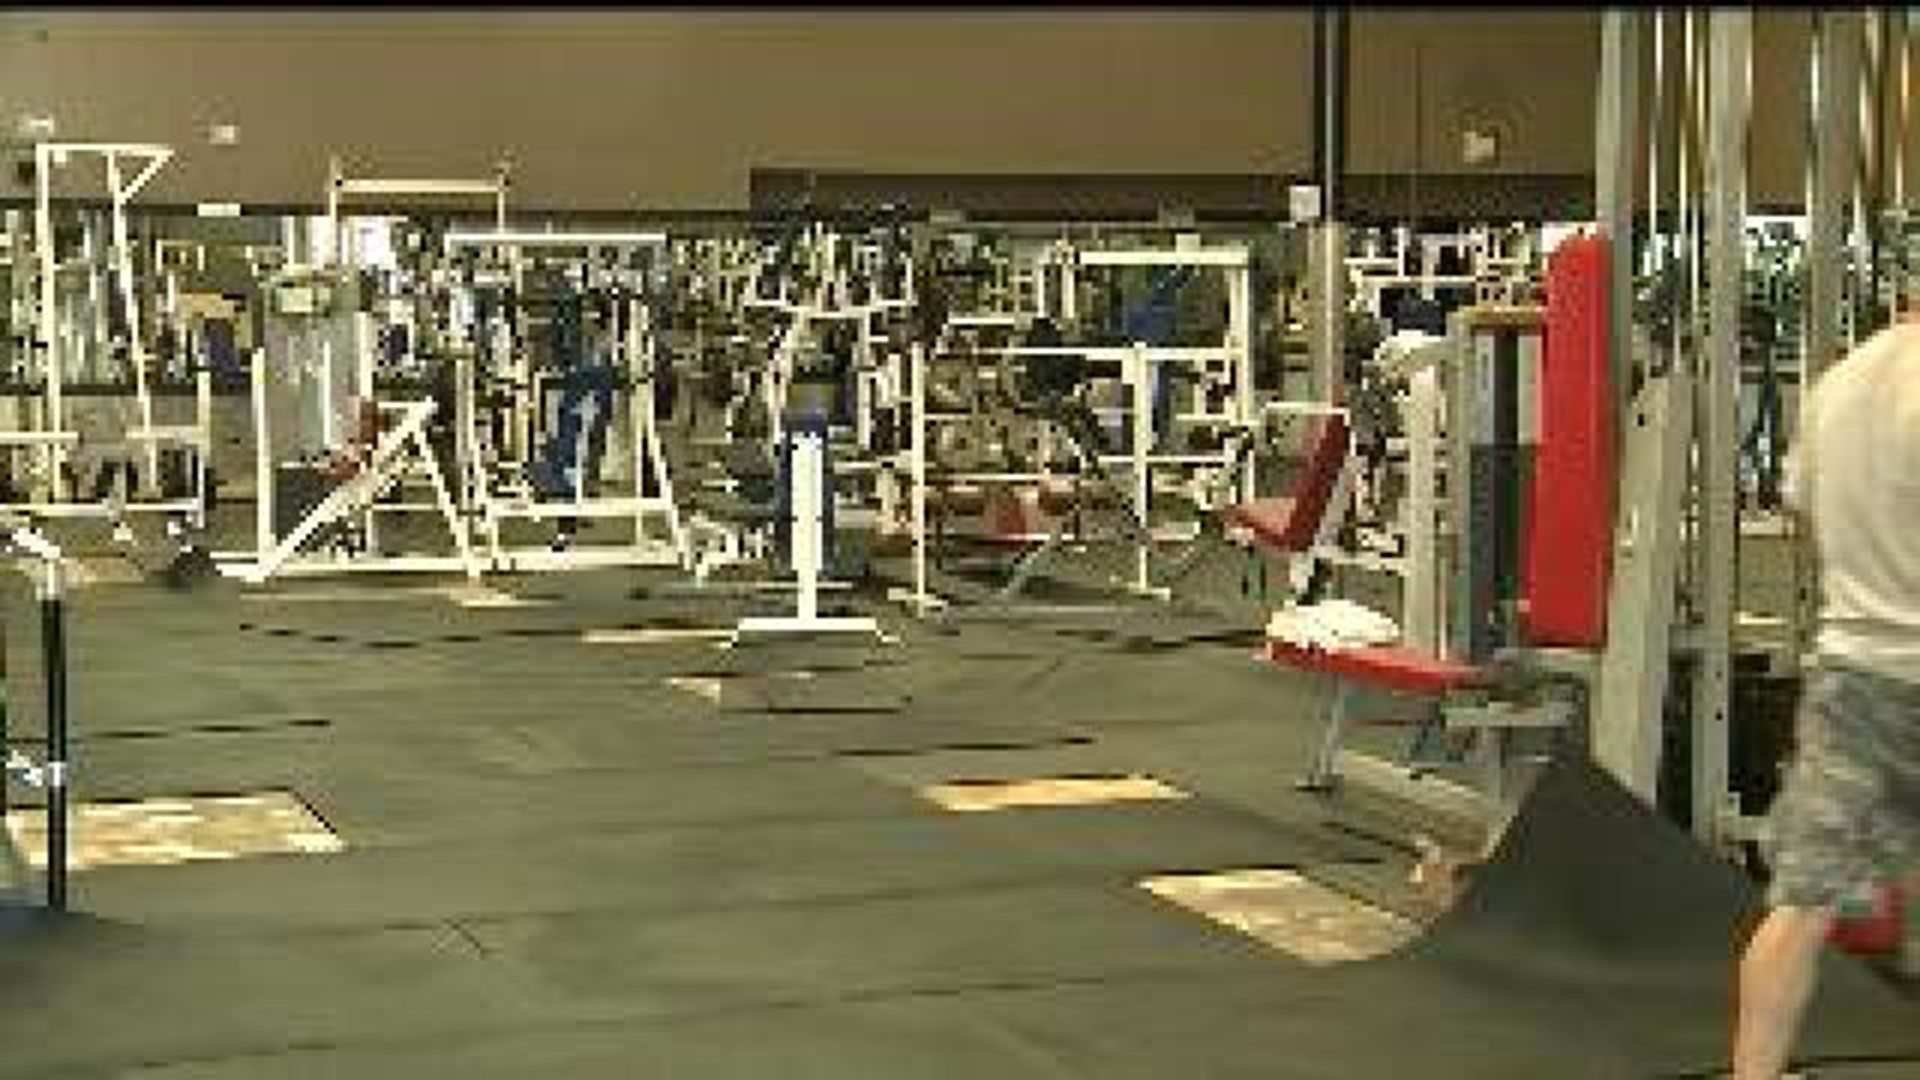 Hilltop Fitness Hopes to Fill Void